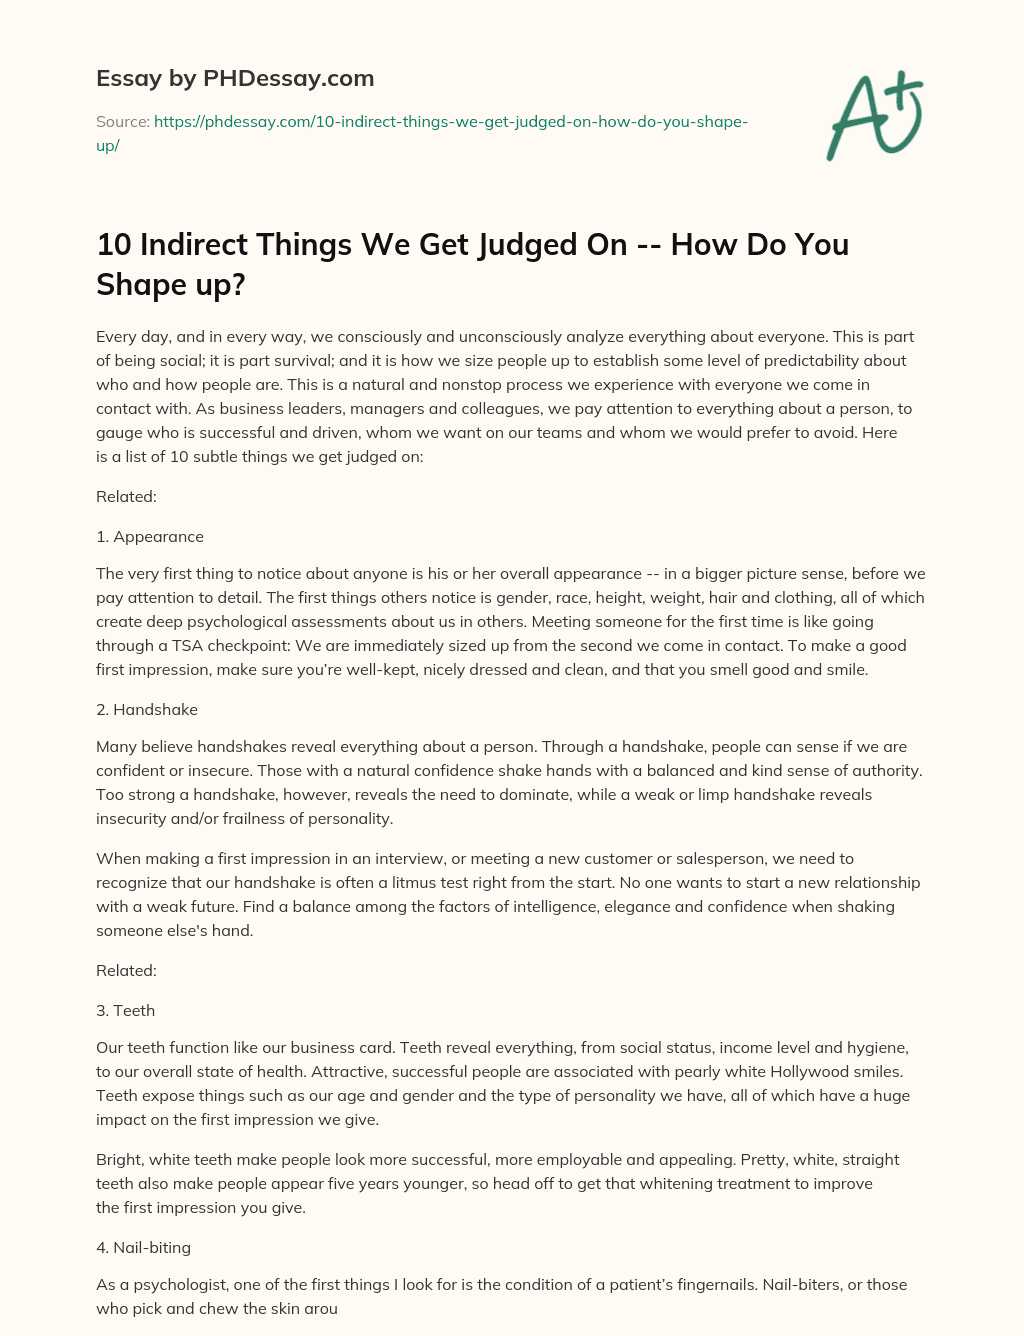 10 Indirect Things We Get Judged On — How Do You Shape up? essay